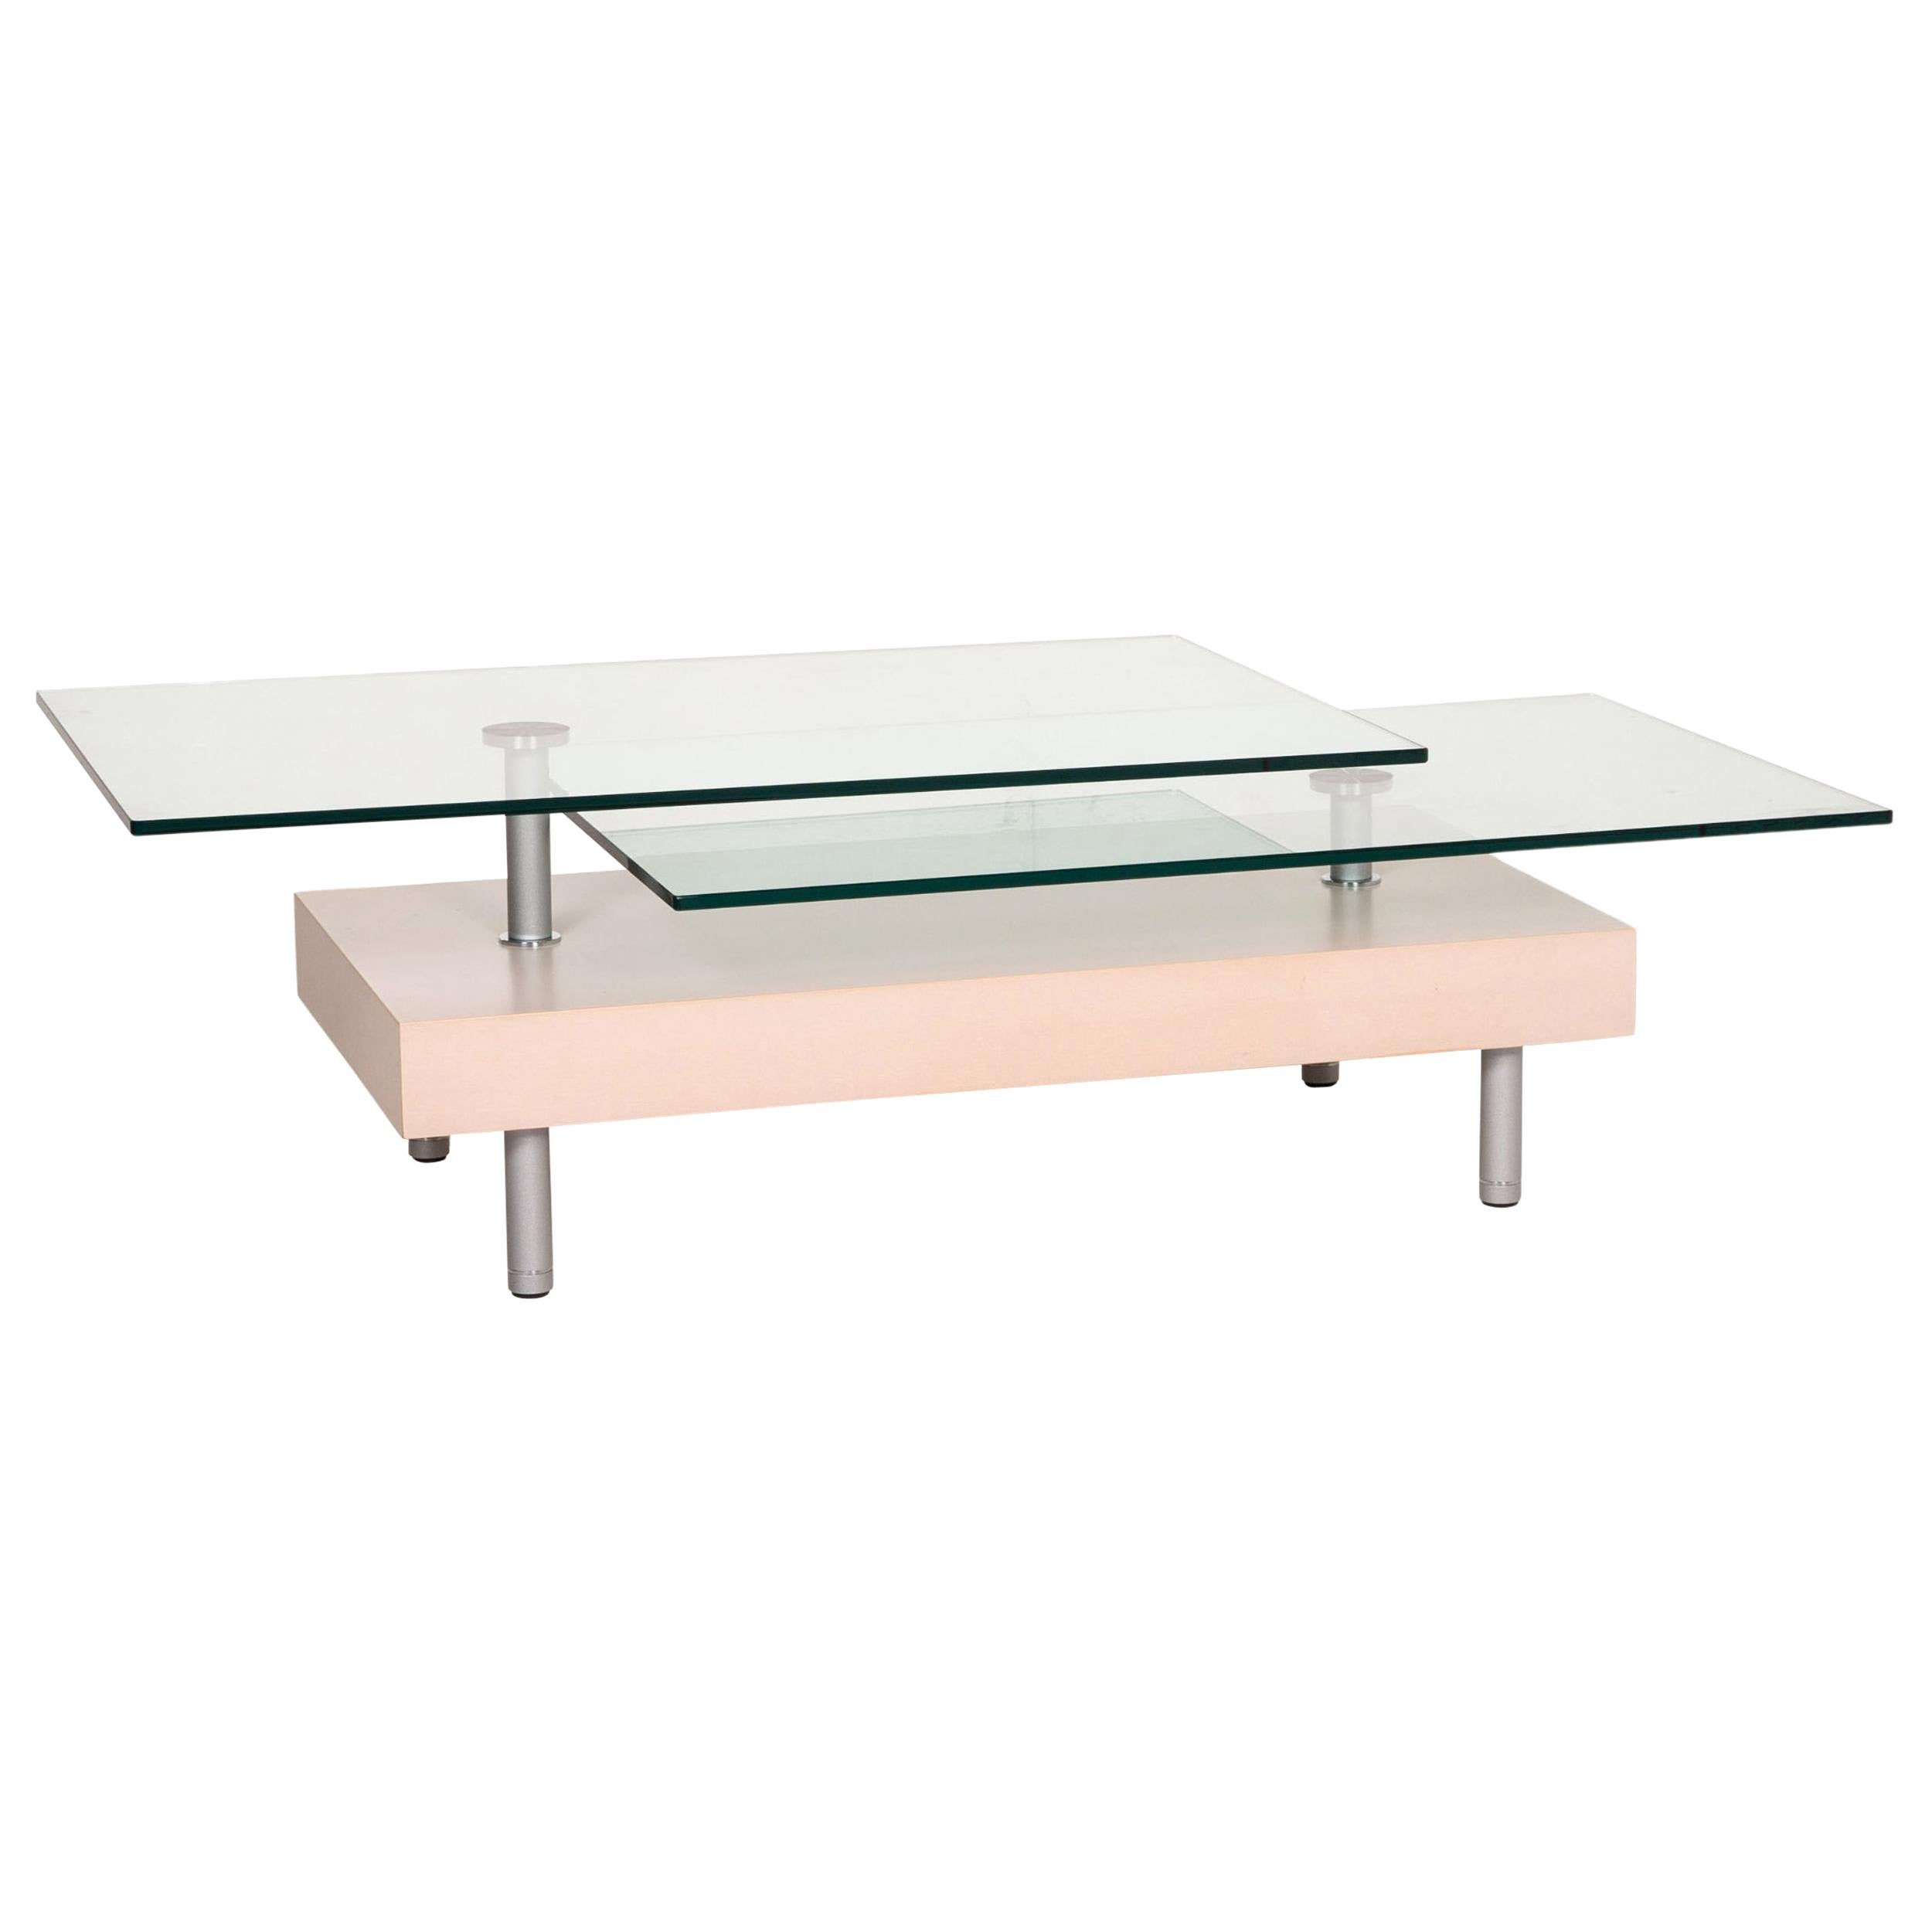 Rolf Benz Glass Coffee Table Beige Function